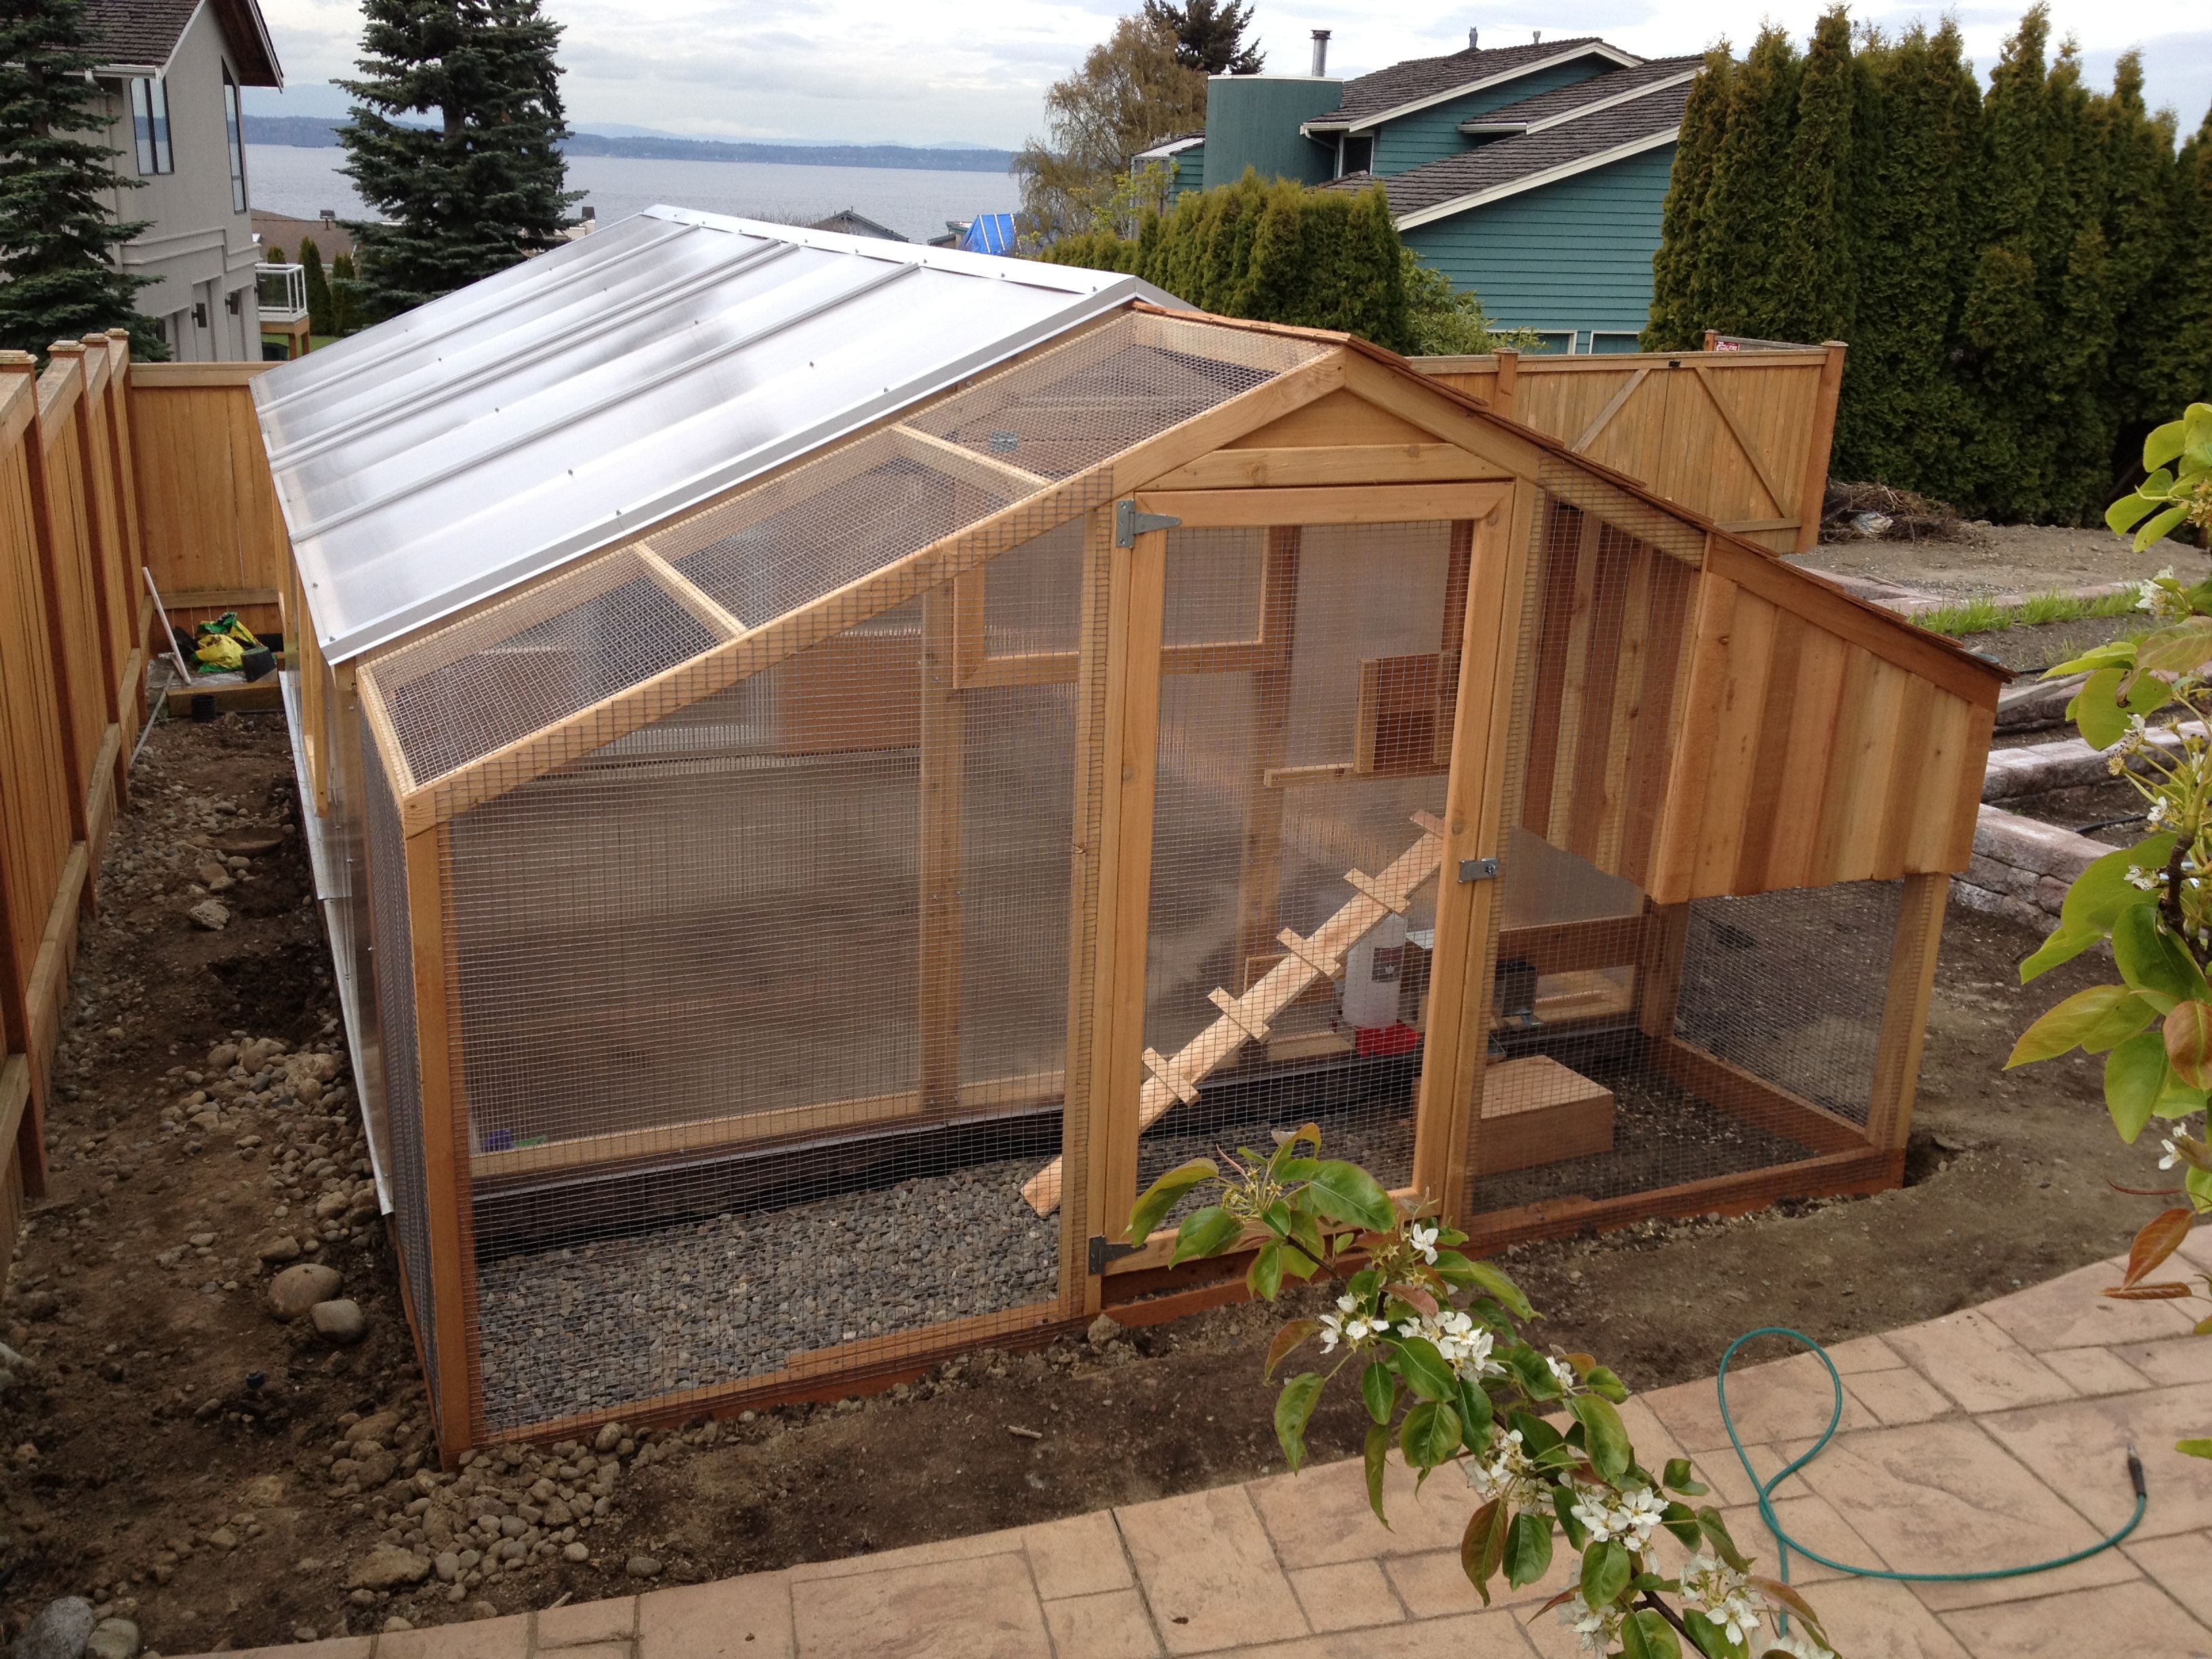  did when he wanted a 11×17 Greenhouse with attached Chicken Coop